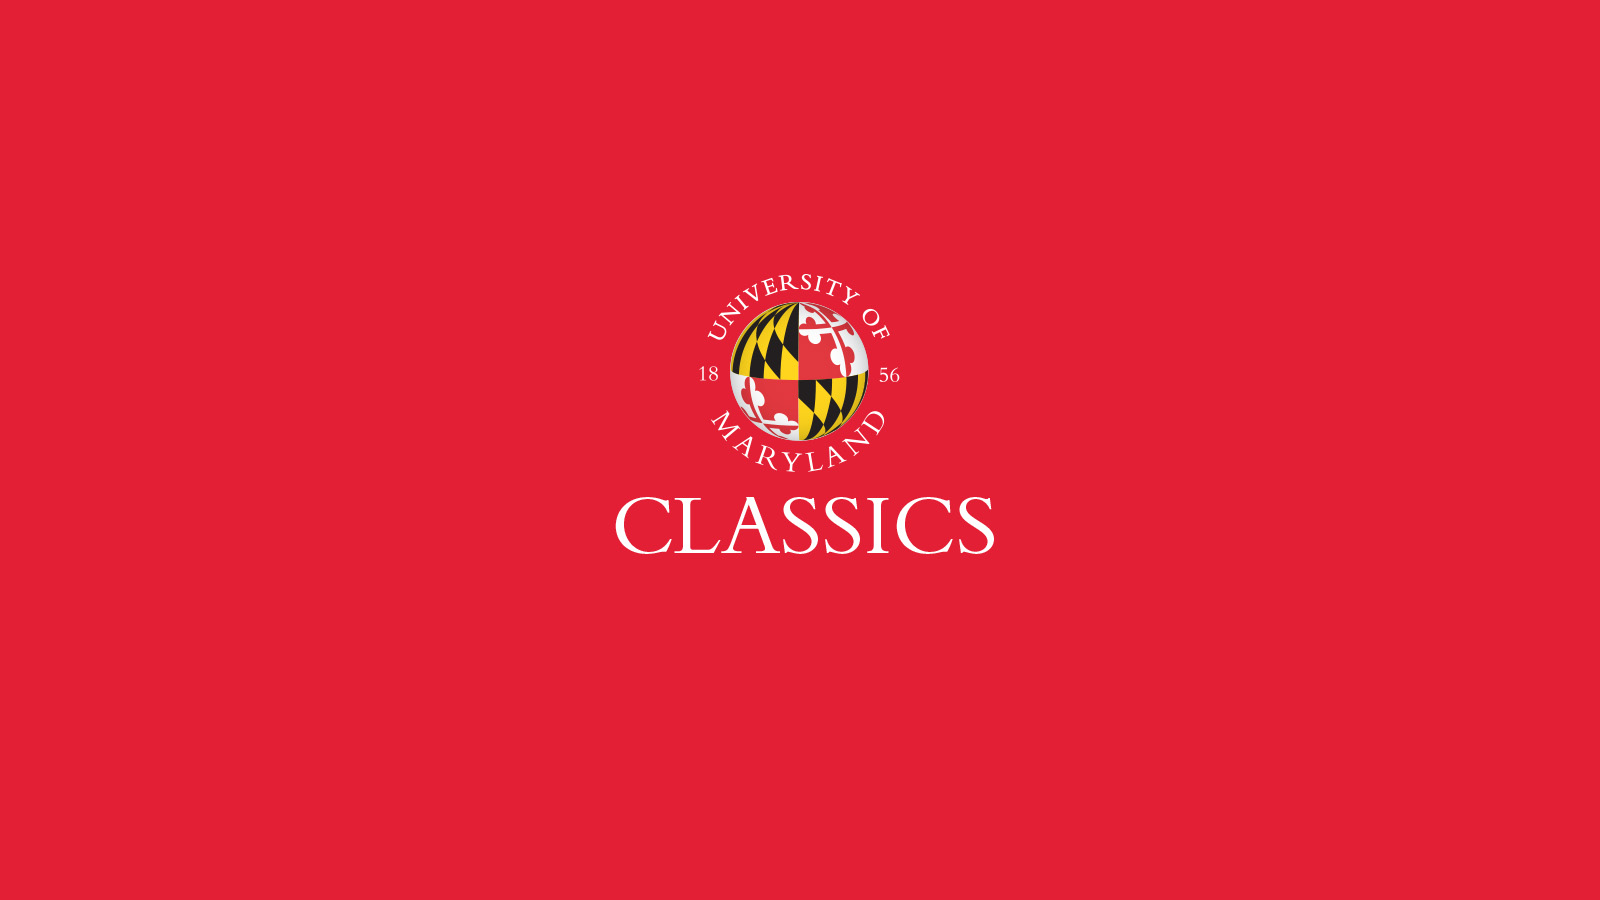 Classics logo on red background